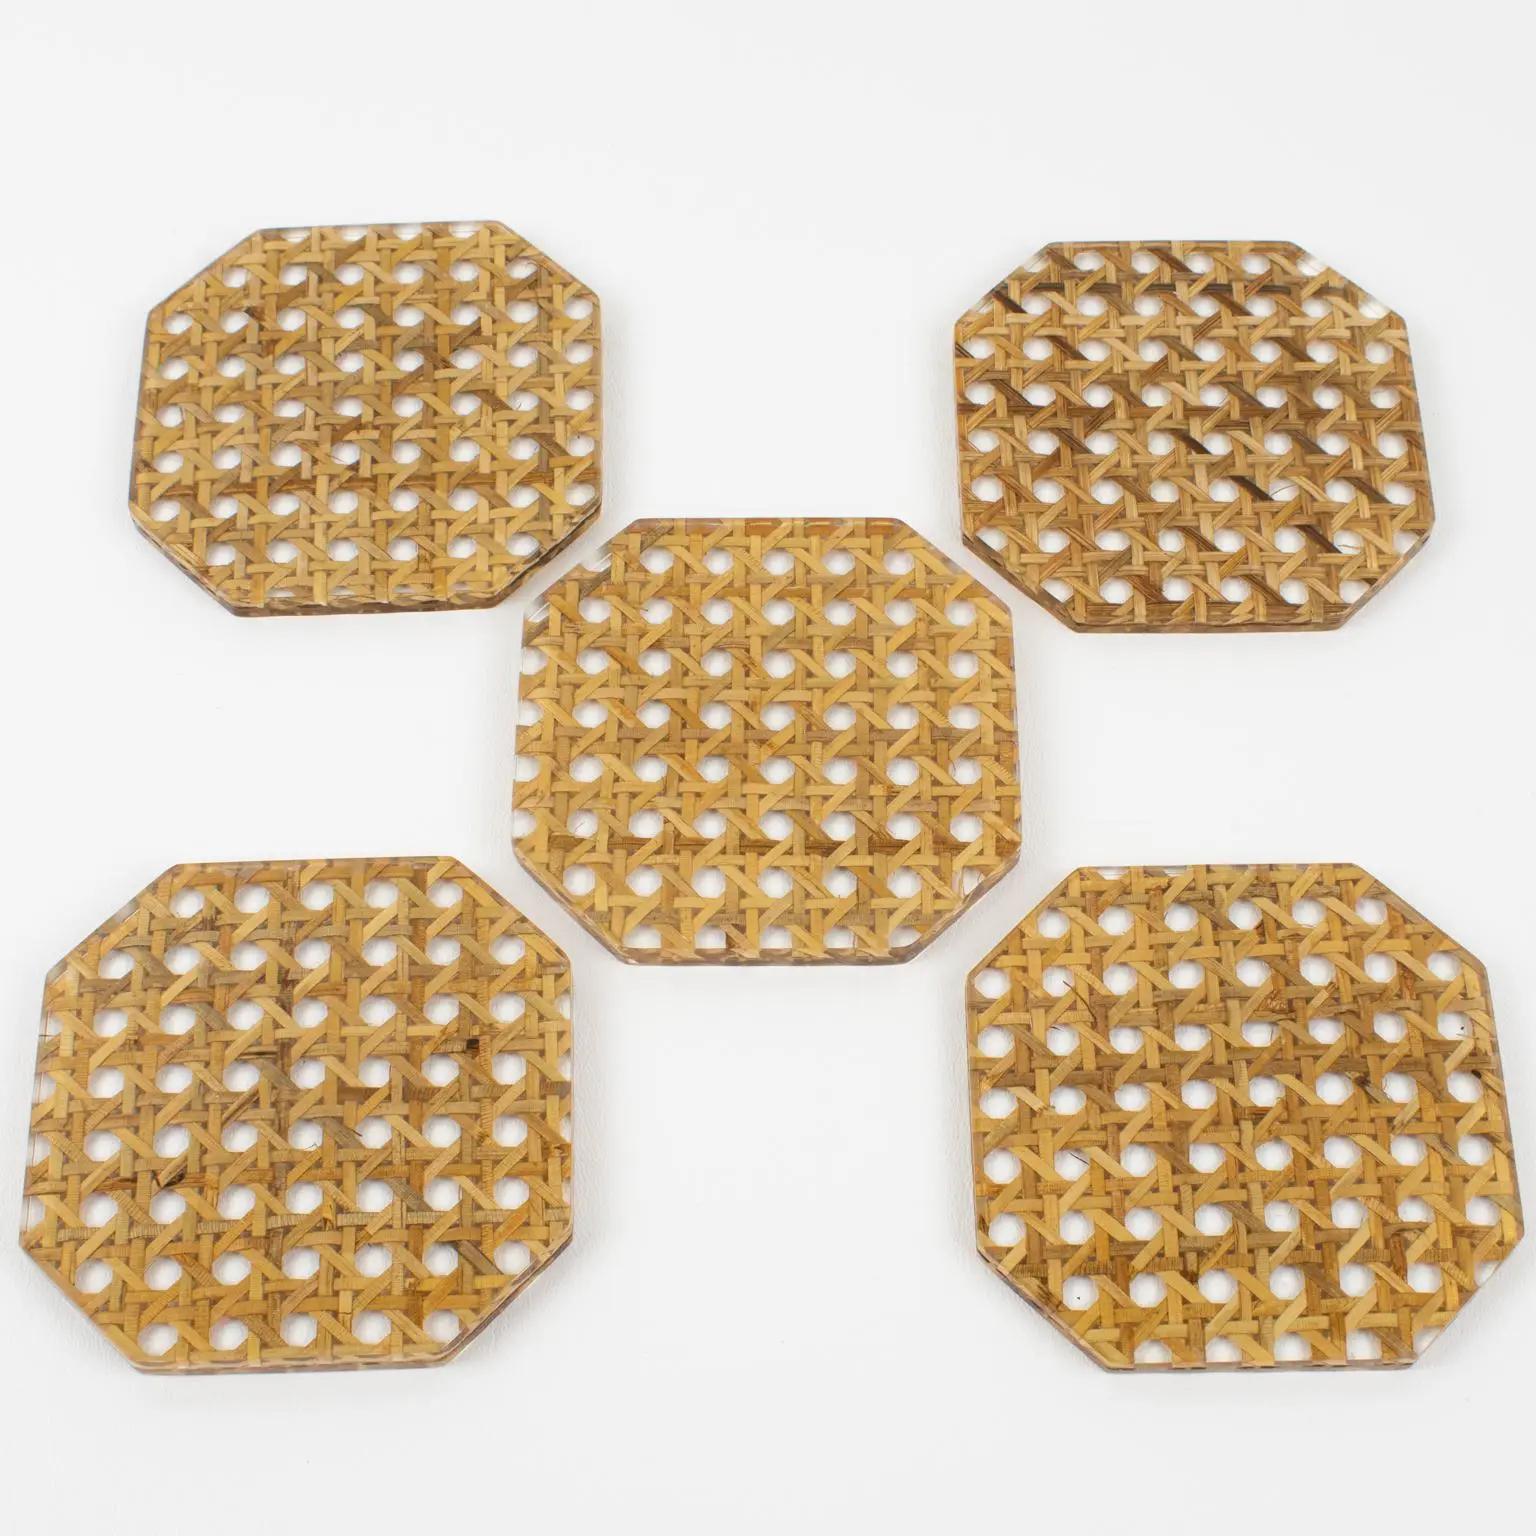 Christian Dior Lucite and Rattan Barware Coasters, set of 5 pieces For Sale 2